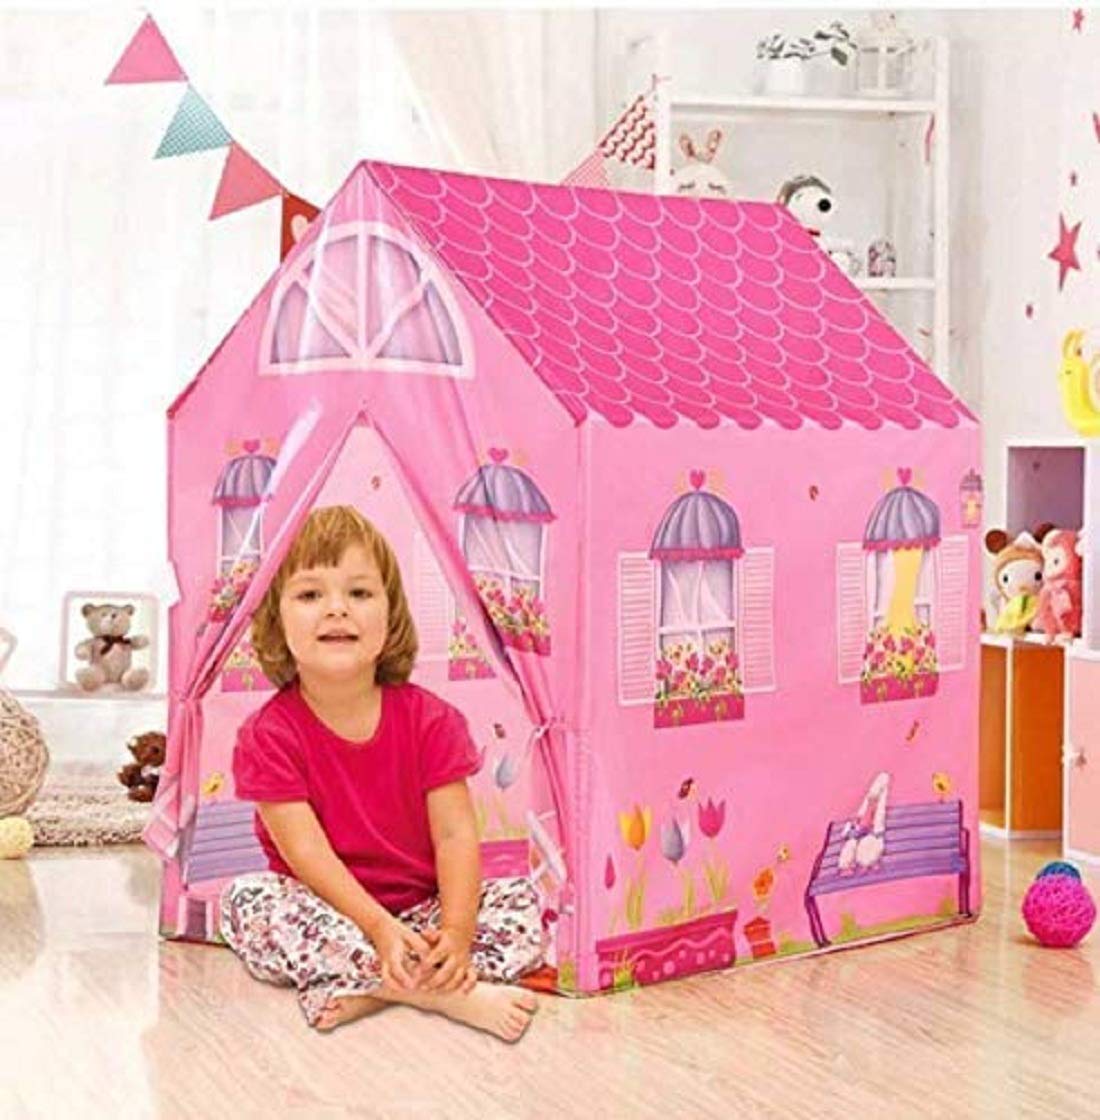 Jumbo Size Extremely Light Weight , Water & Fire Proof Spider Tent House Theme for Girls 10 Year Old Girls - Homely Arts